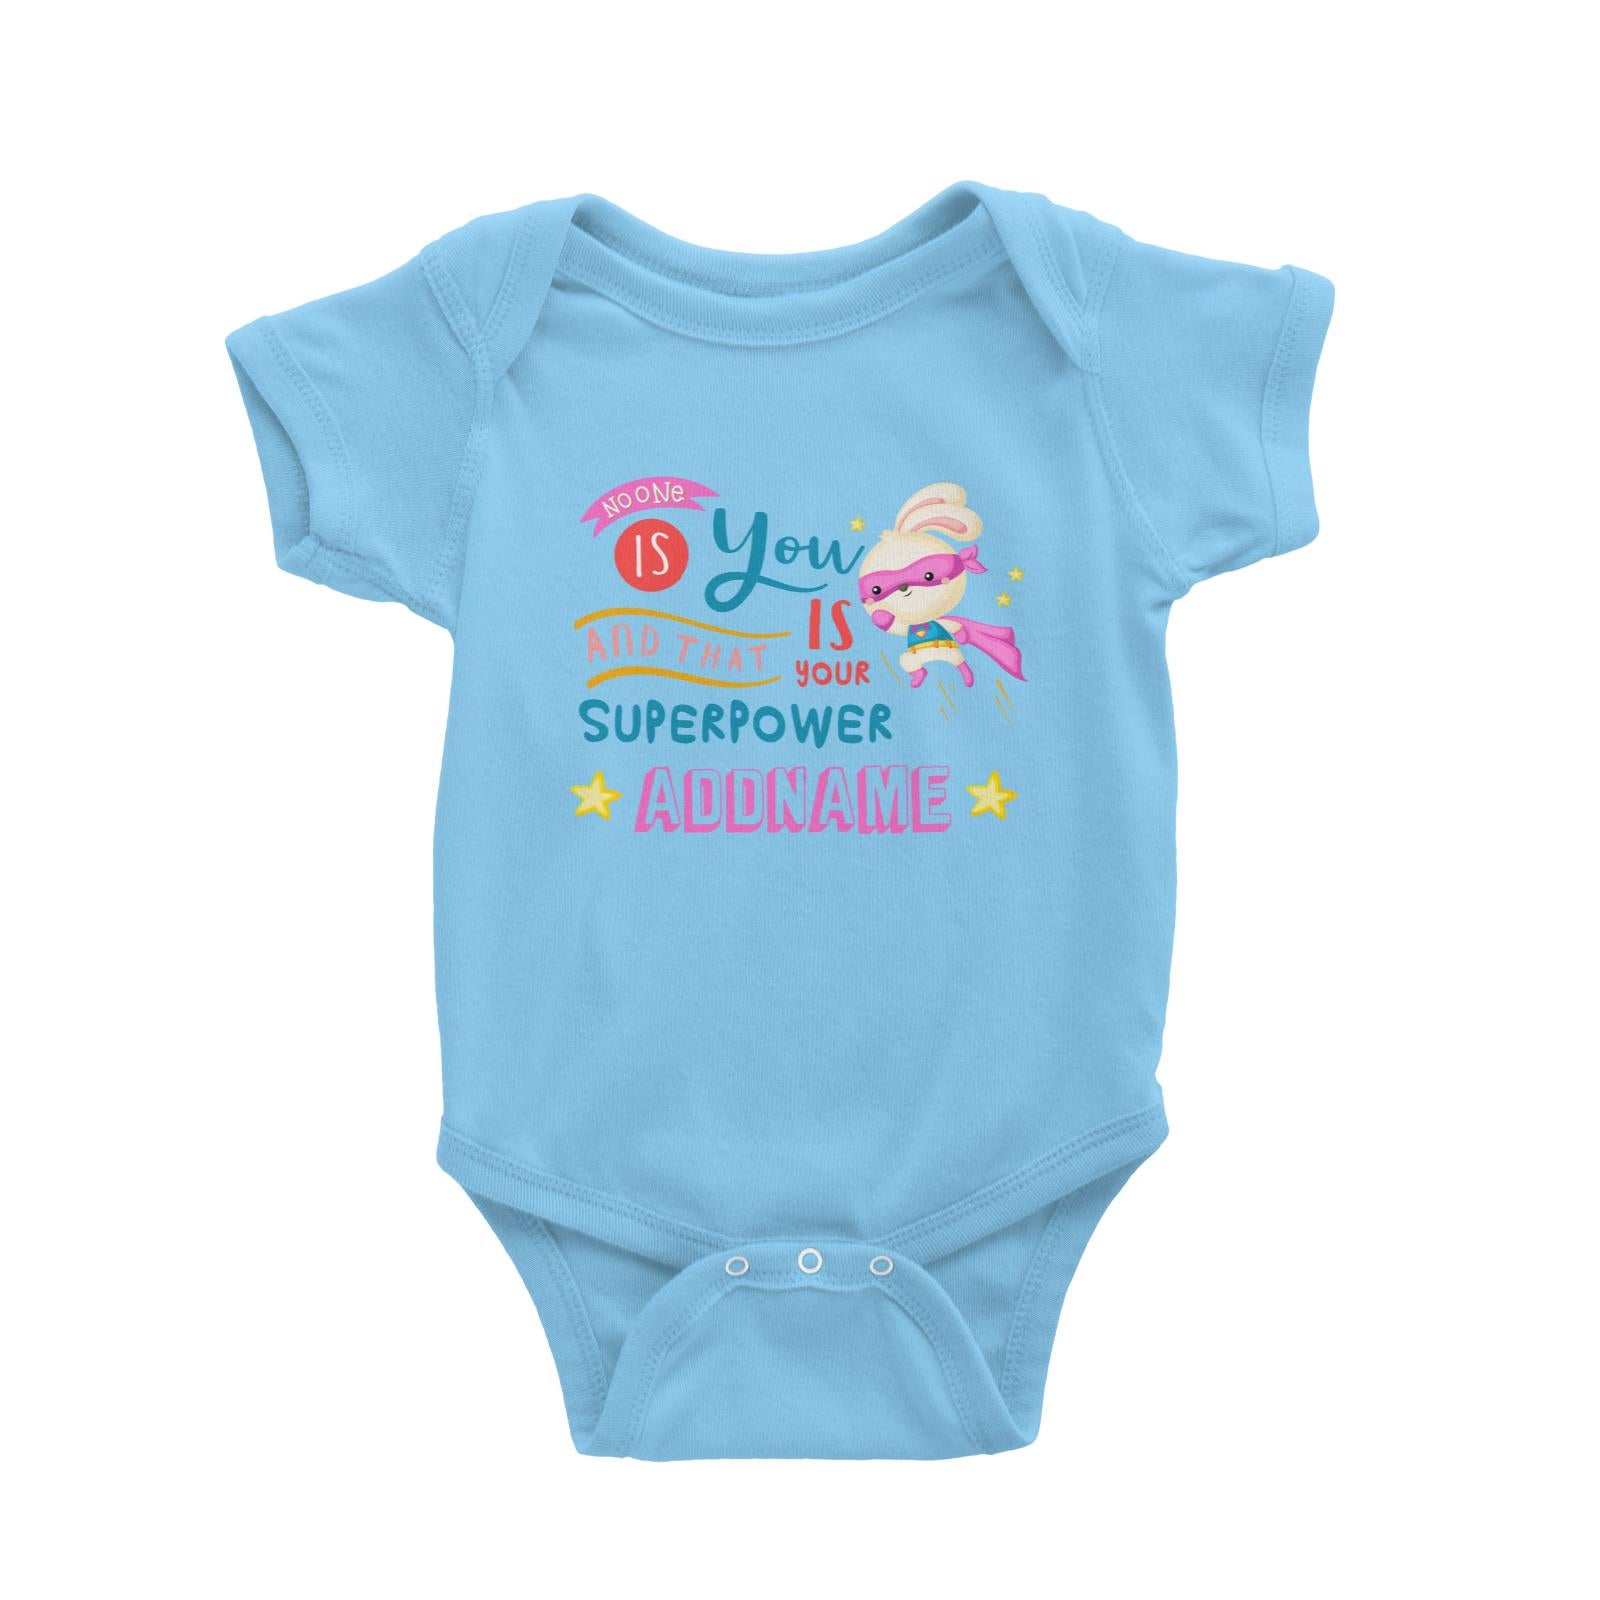 Children's Day Gift Series No One Is You And That Is Your Superpower Pink Addname Baby Romper